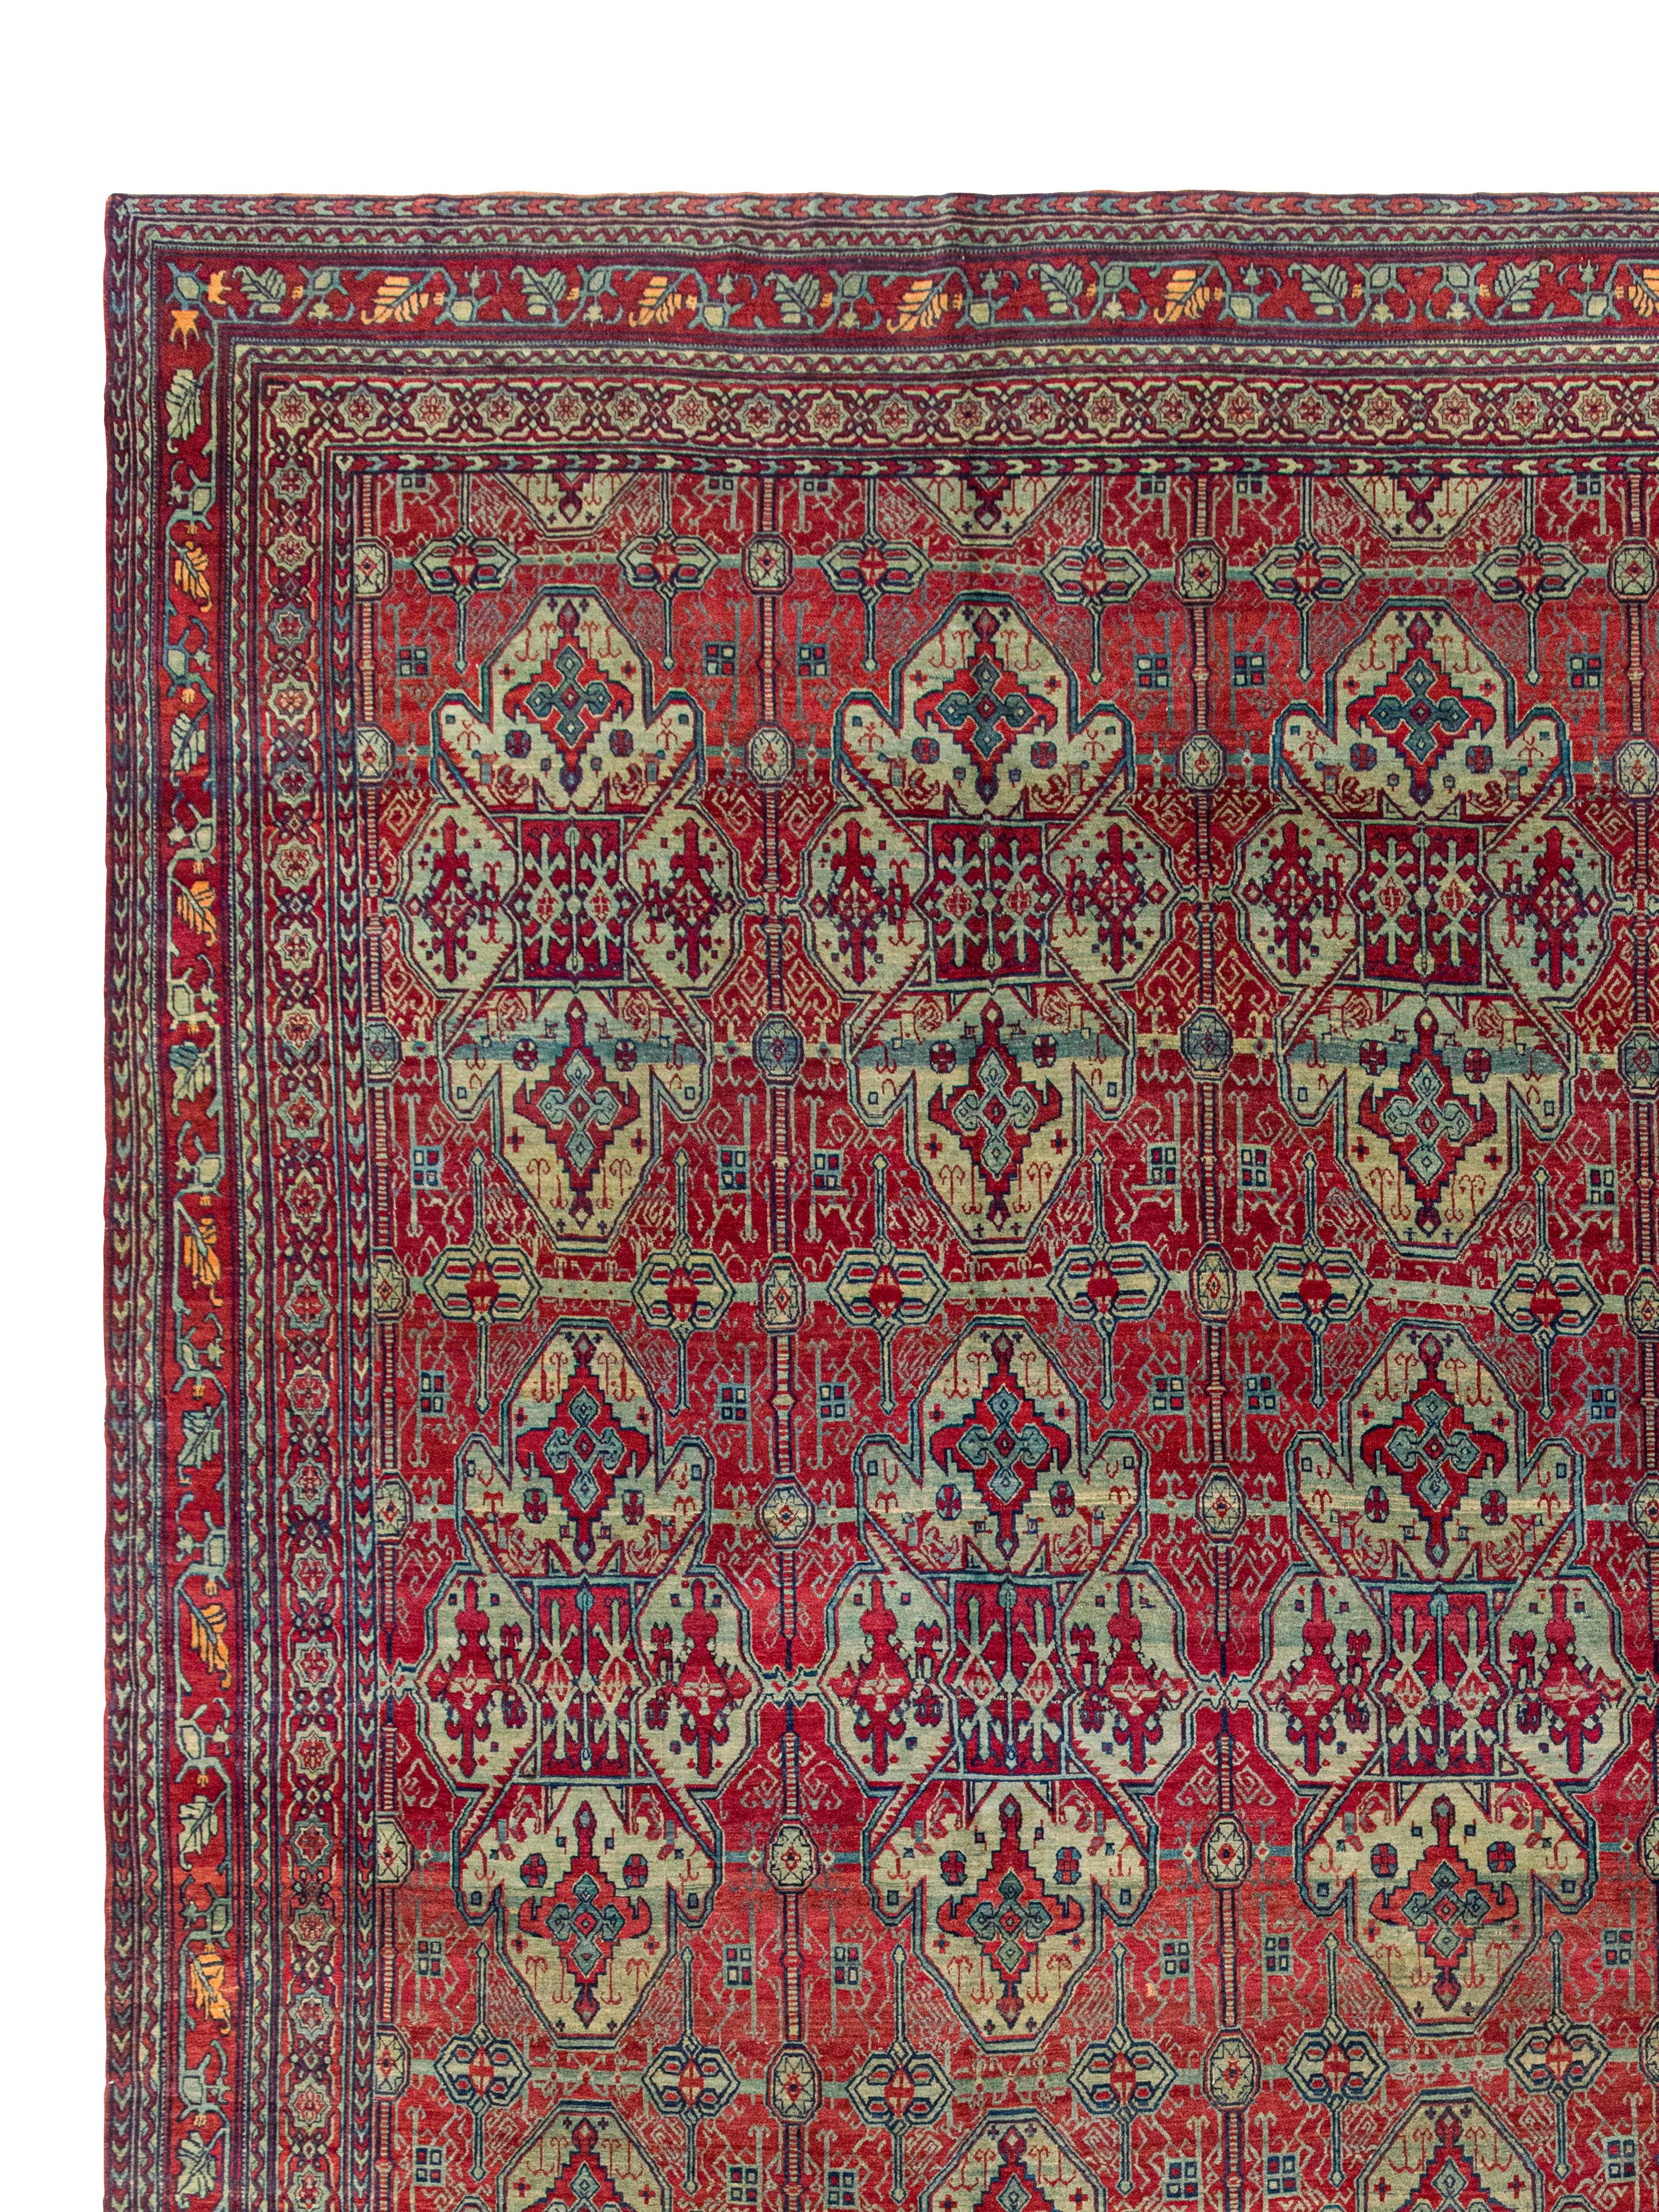 Khorasan Rug Antique c. 1880s In Good Condition For Sale In Los Angeles, CA